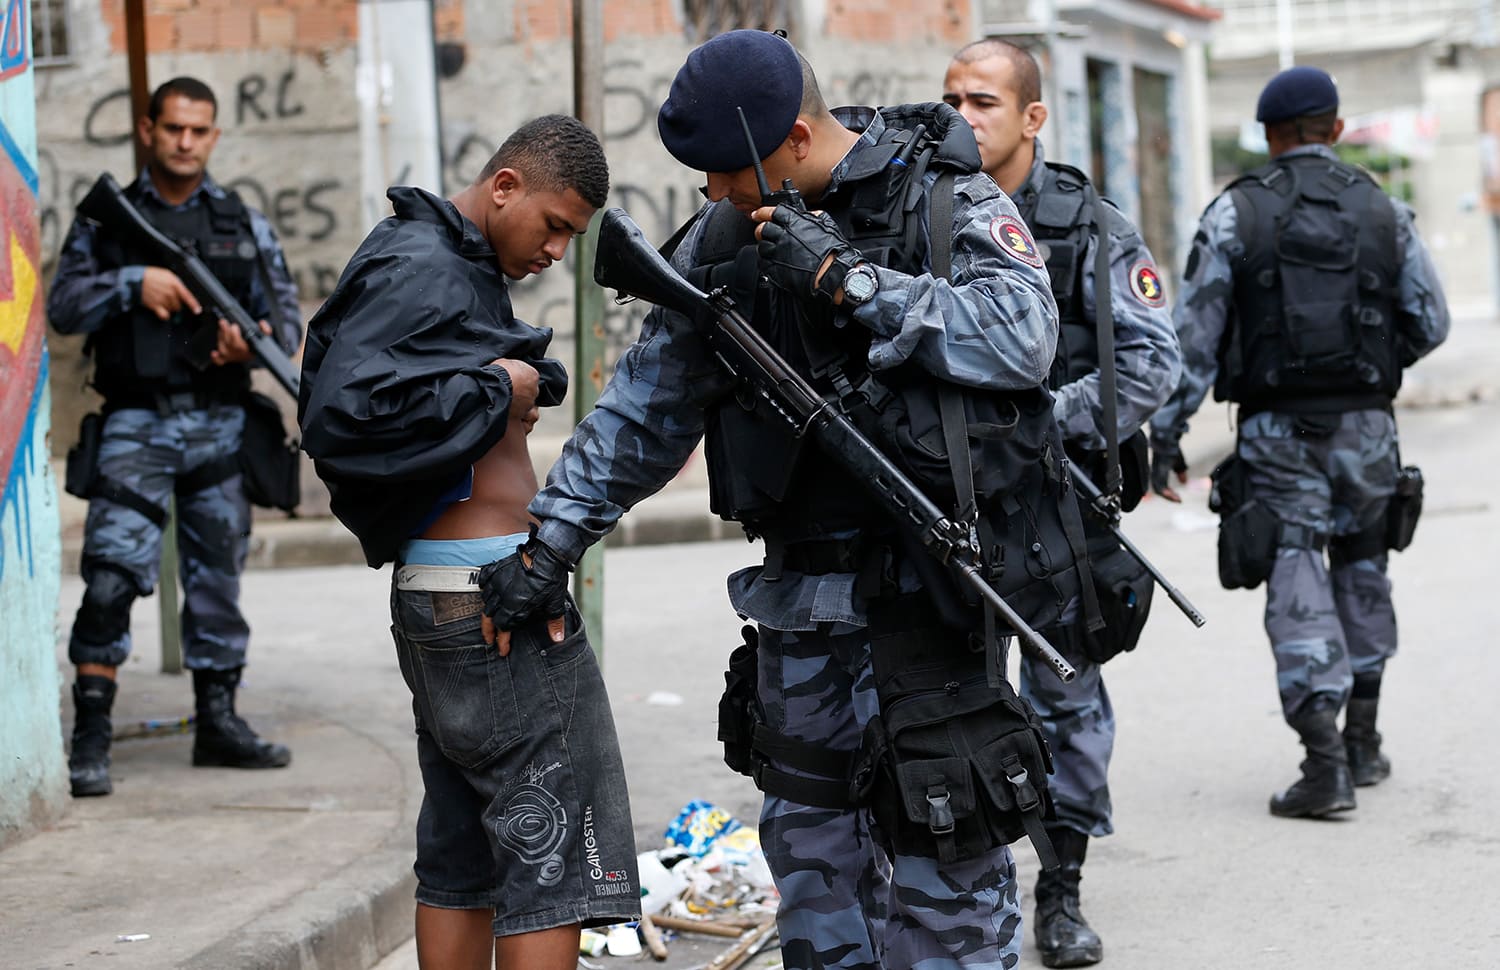 In Brazil, the police behave as in the civil war and repeatedly target innocent people.